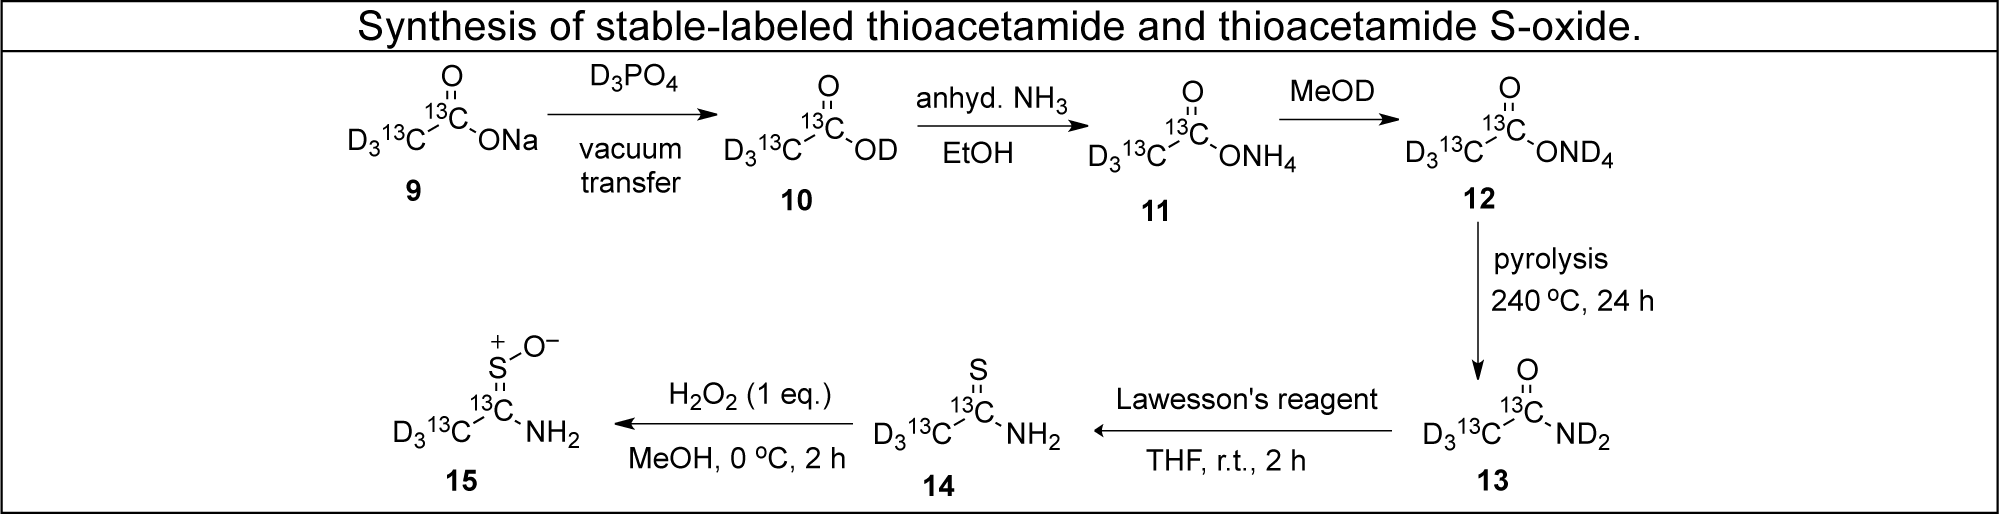 Synthesis of stable-labeled thioacetamide and thioacetamide S-oxide